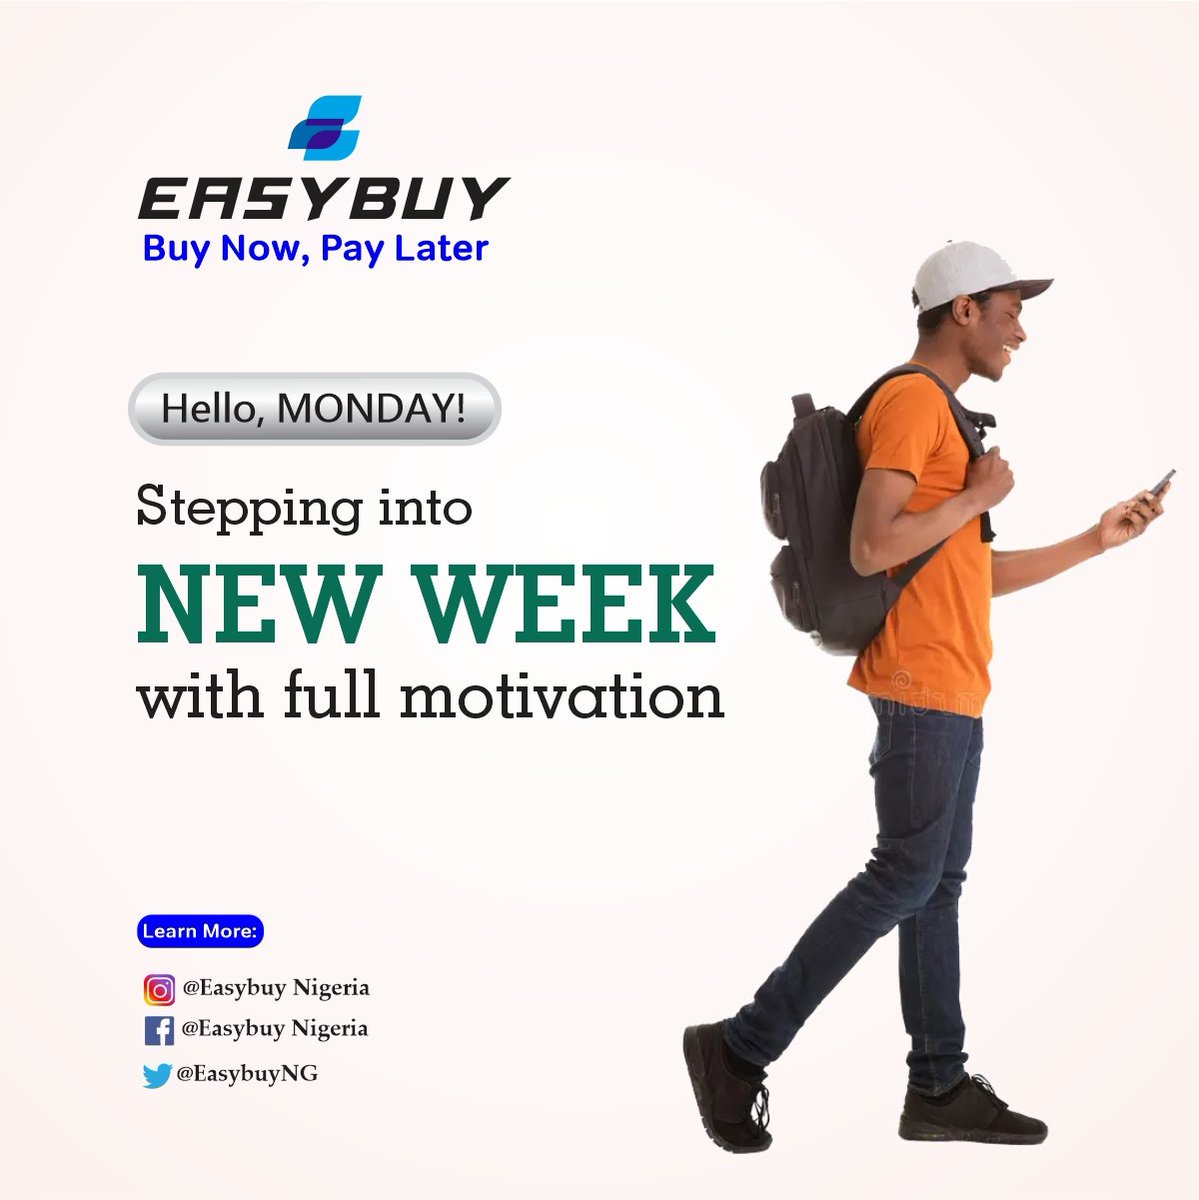 Hello Monday!

As we start a new week, may you stay positive and committed to your goals! I wish you a wonderful week ahead.

Cheers to the New week .
CLick on the link to register on EASYBUY now.
channels-h5.easybuy.loans/#/market?id=3
#EASYBUY
#BuyNowPayLater